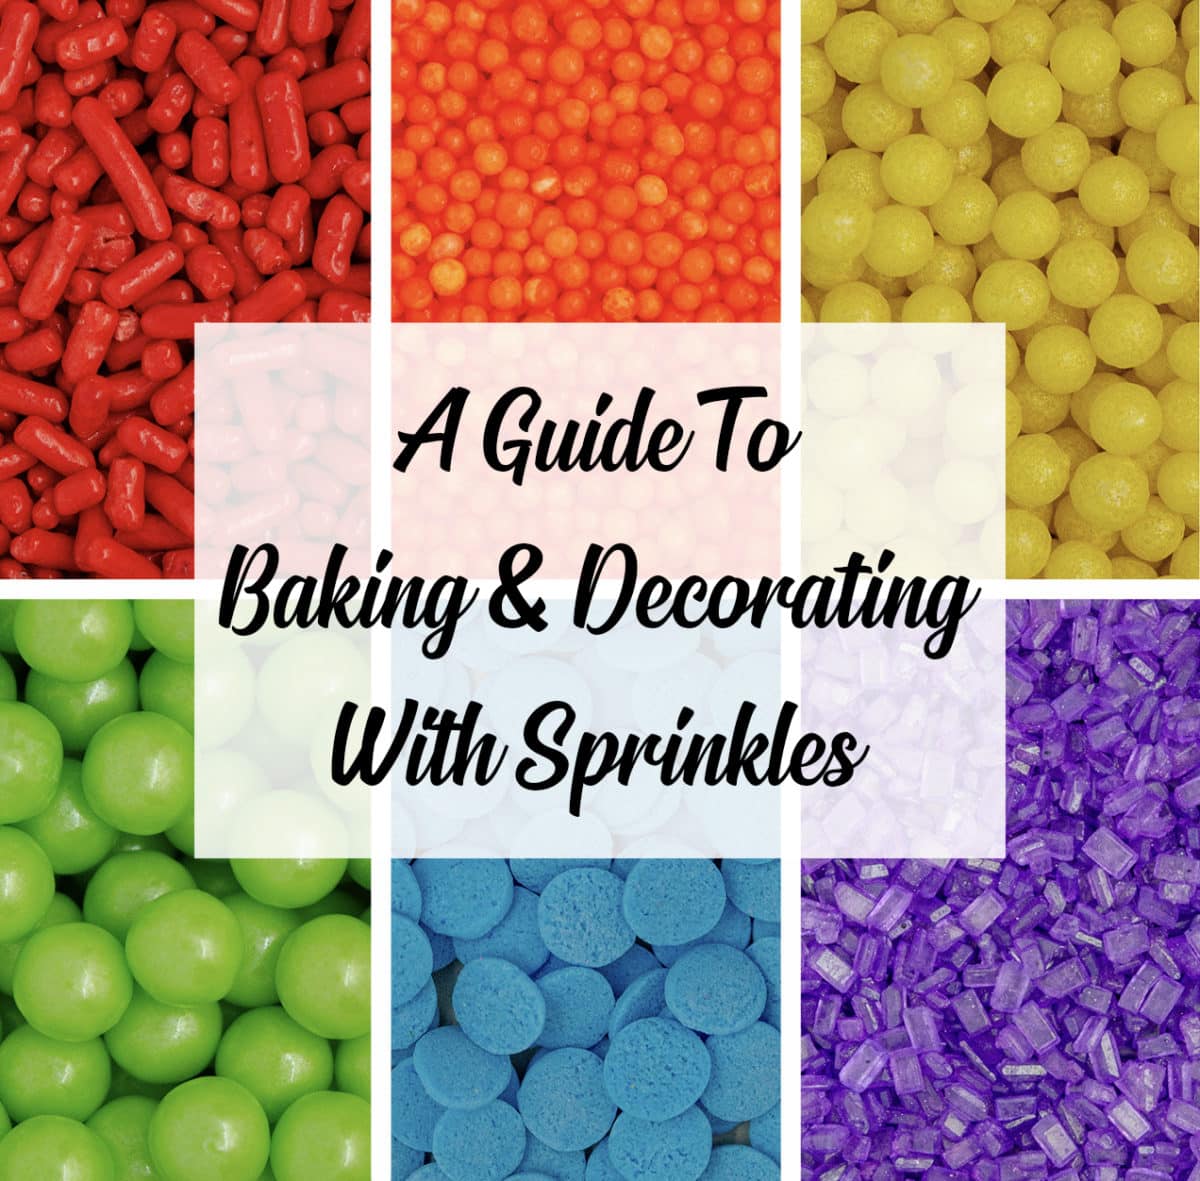 A Guide to Baking and Decorating With Sprinkles